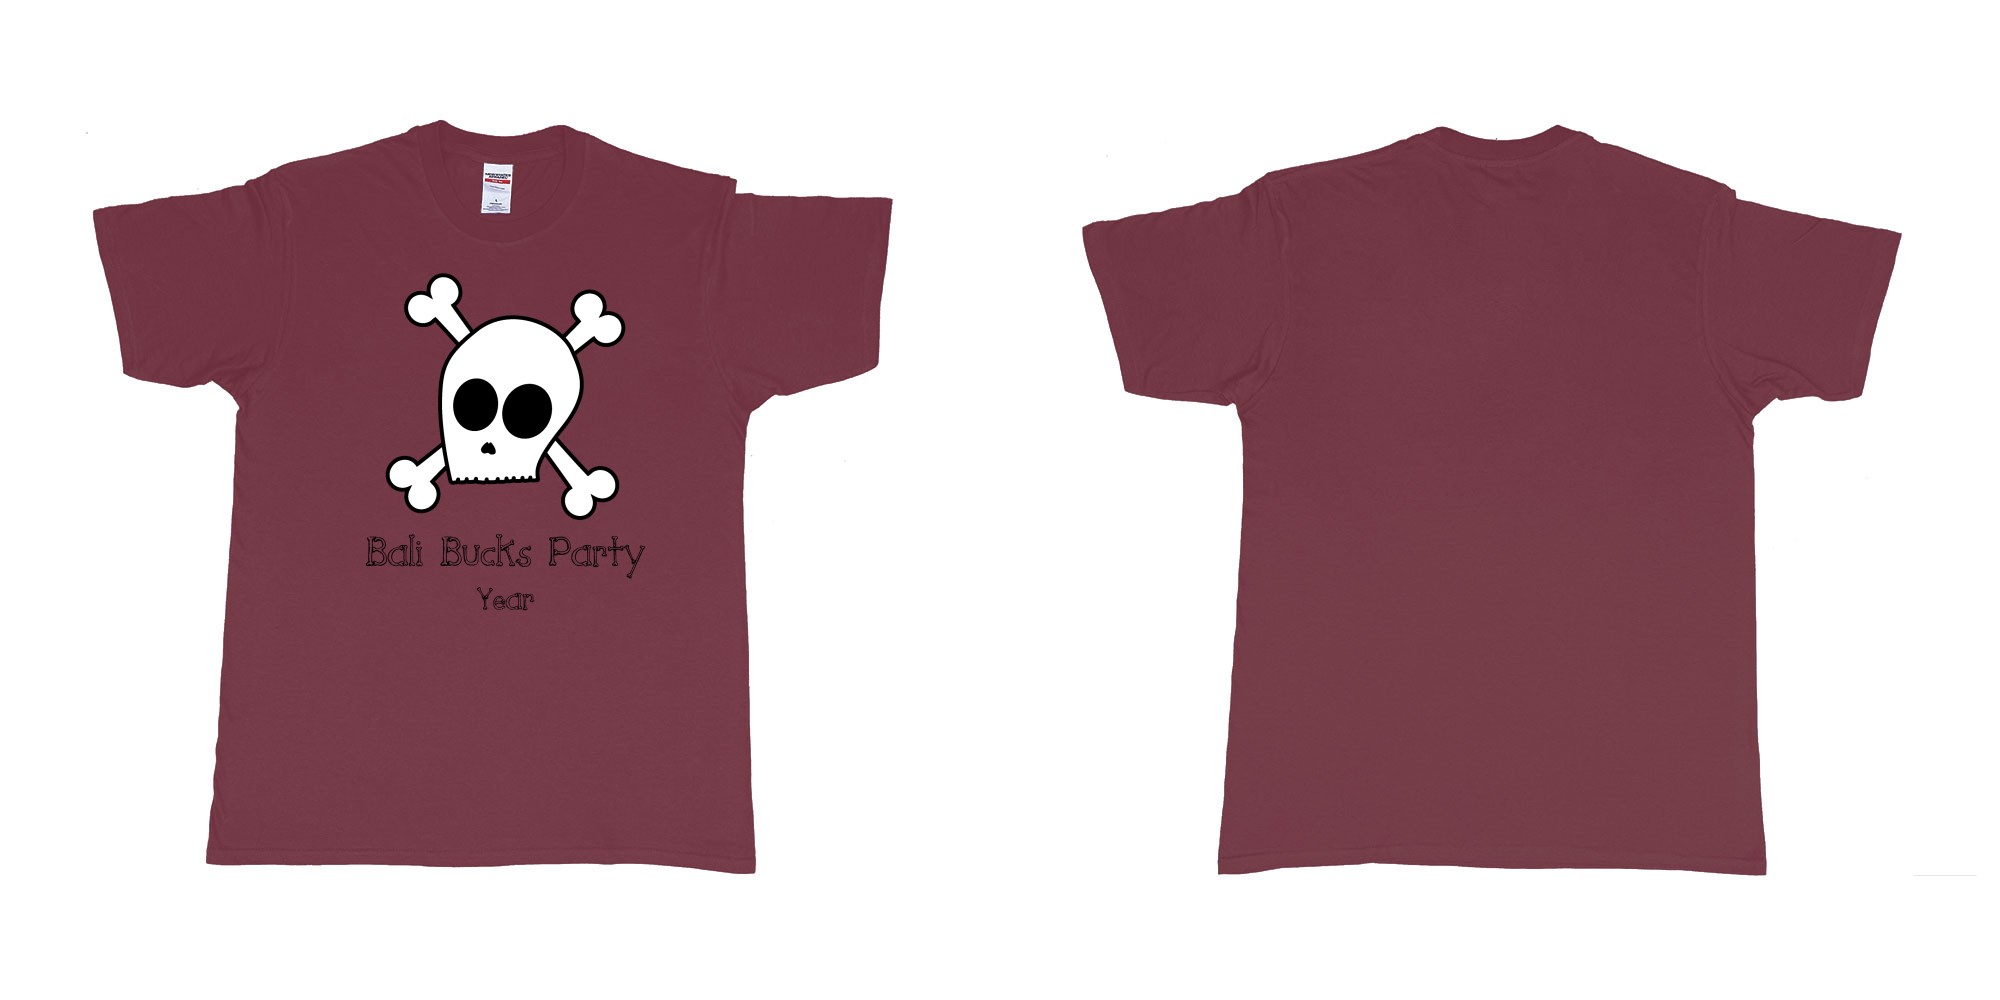 Custom tshirt design bali bucks party skull in fabric color marron choice your own text made in Bali by The Pirate Way